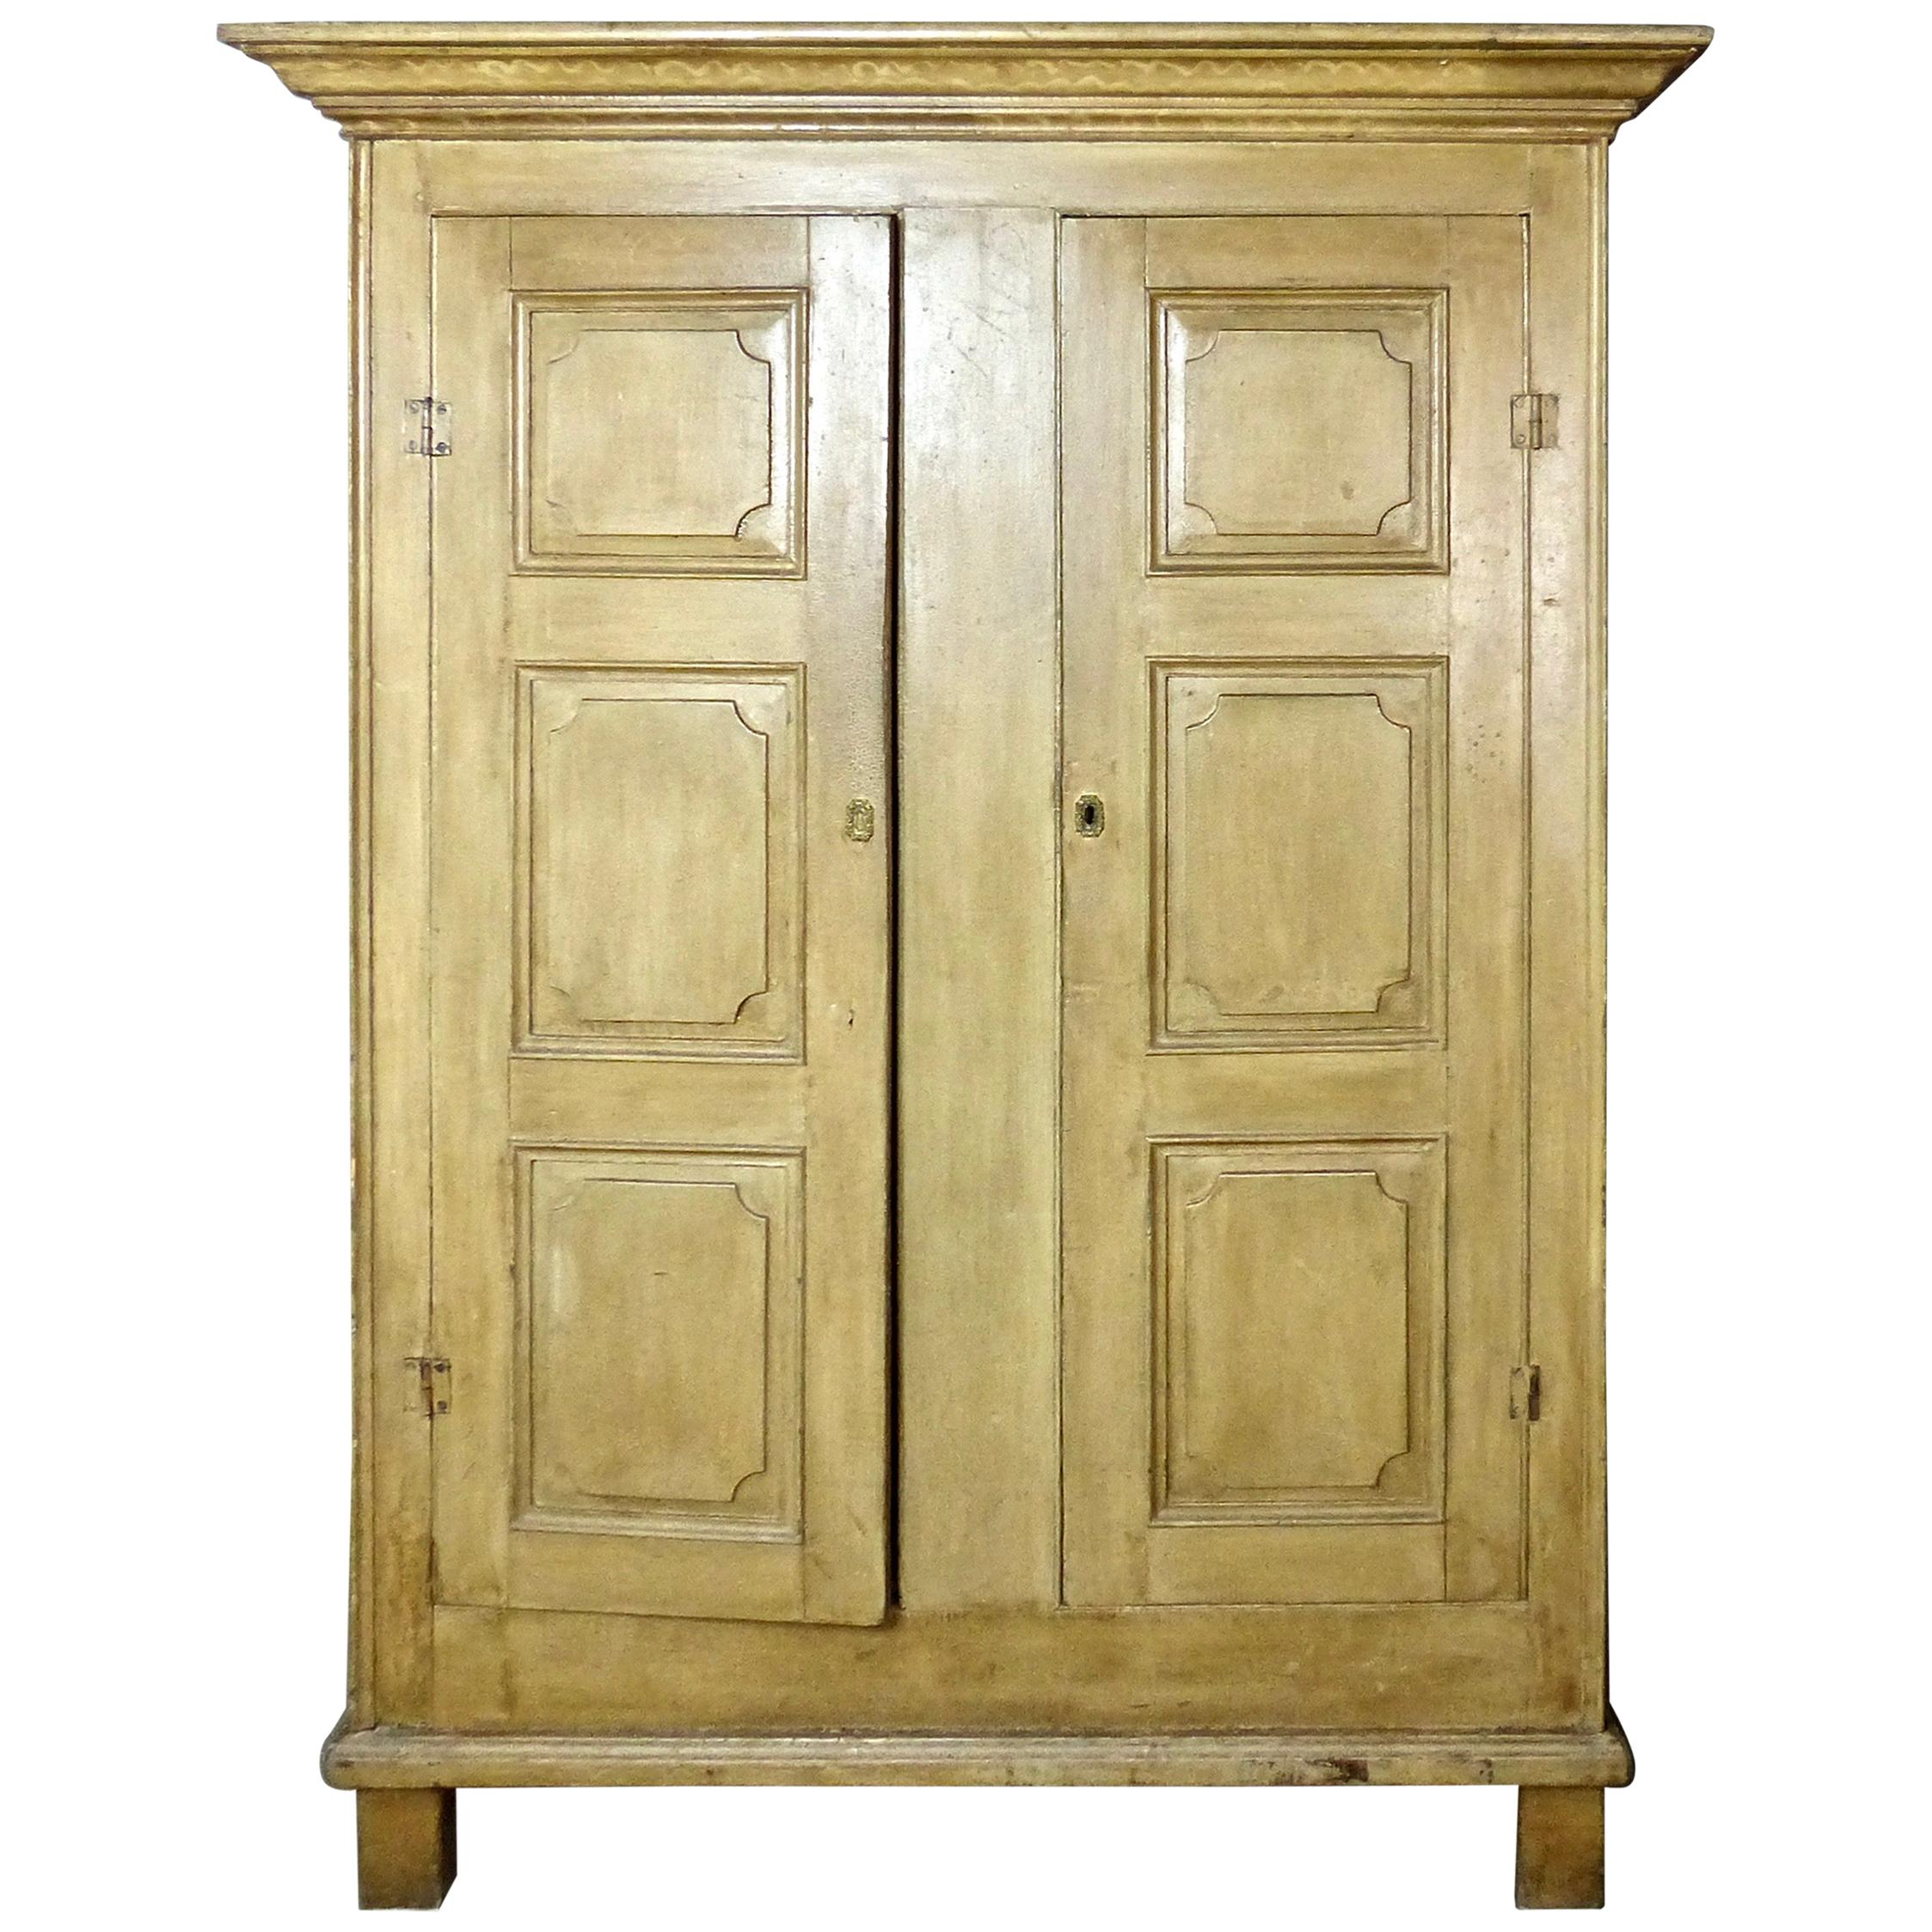 Painted Quebec Pine Canadian Armoire Cabinet, circa 1850